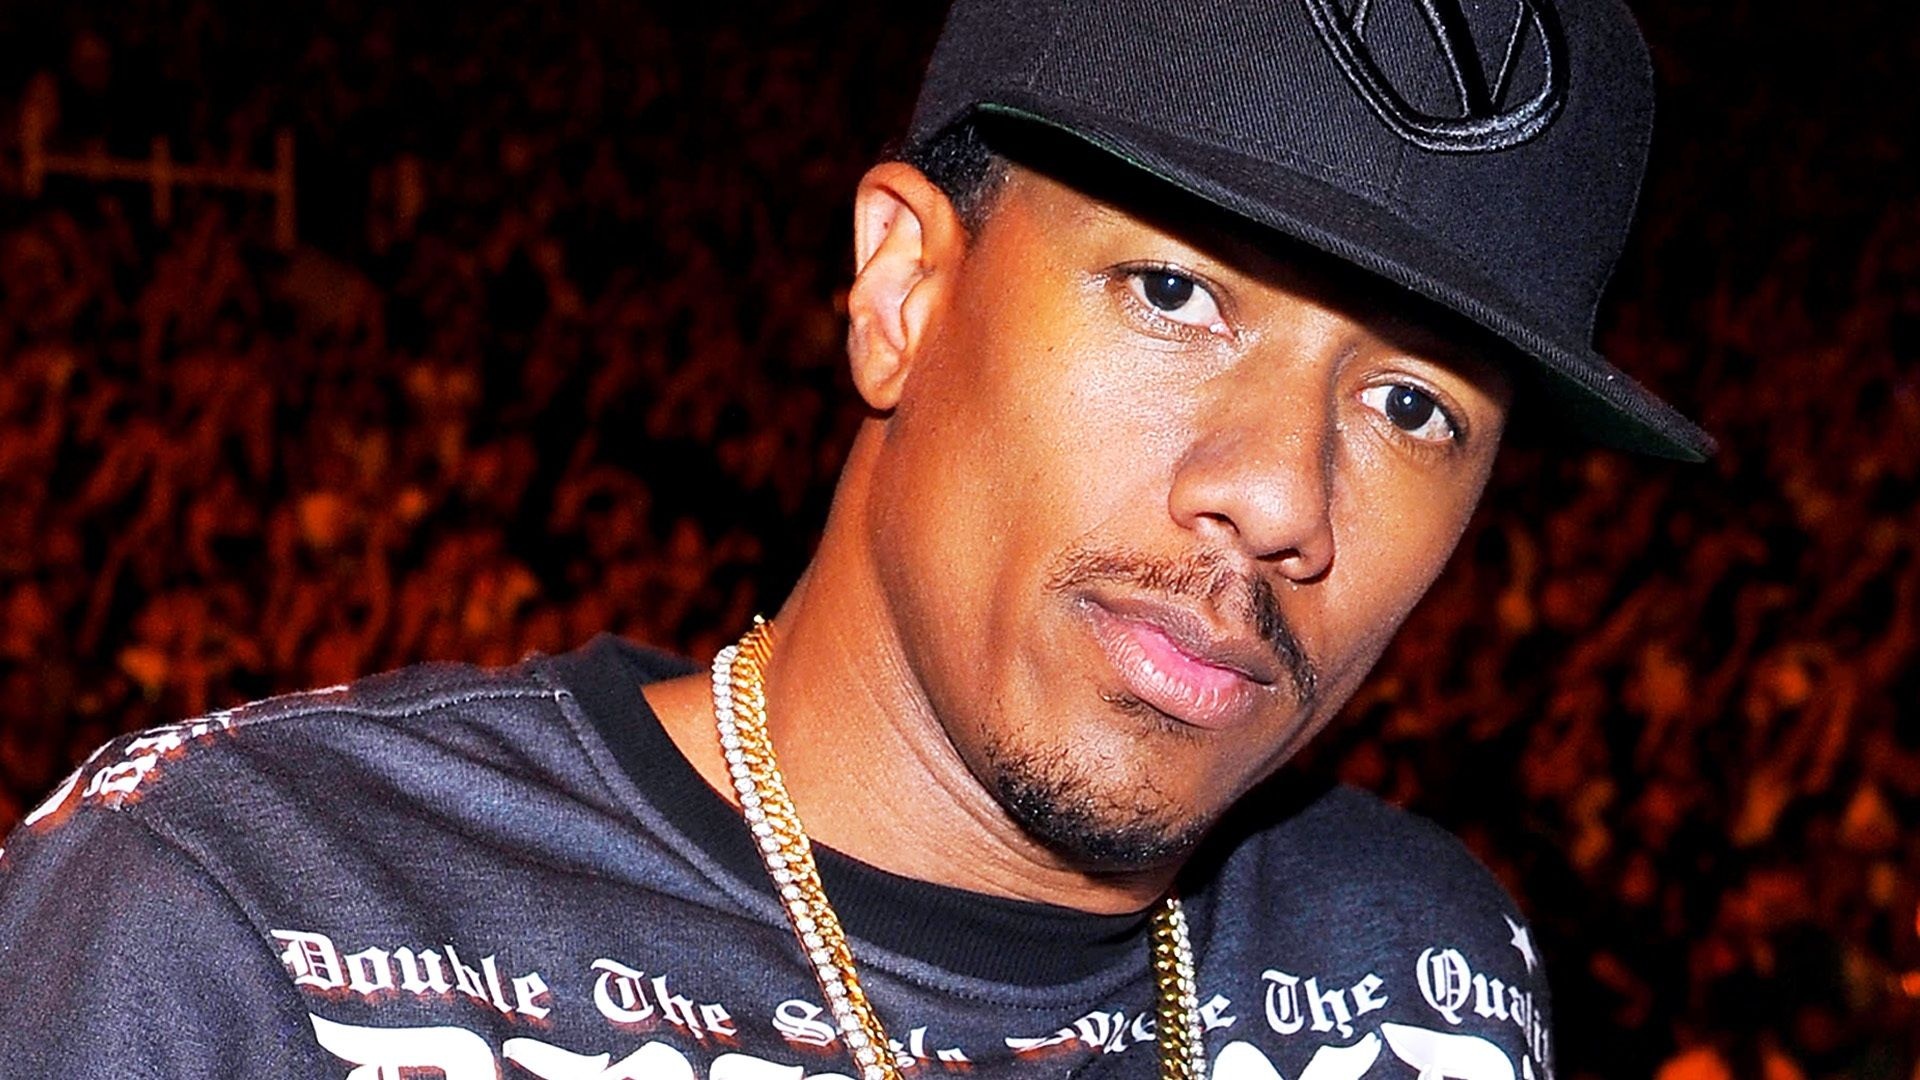 Nick Cannon, Wallpapers, Backgrounds, Images, 1920x1080 Full HD Desktop